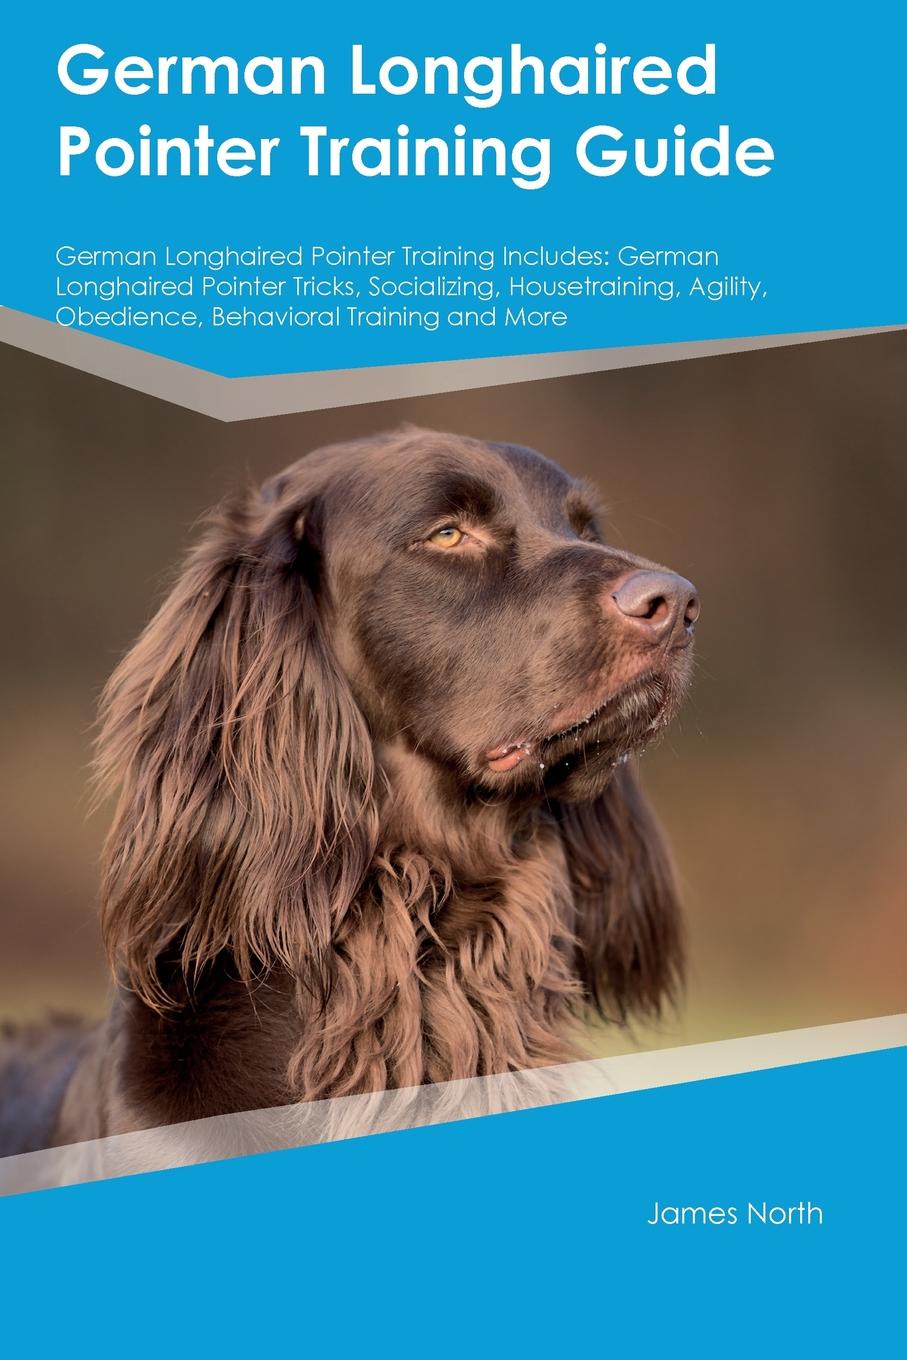 German Longhaired Pointer Training Guide German Longhaired Pointer Training Includes. German Longhaired Pointer Tricks, Socializing, Housetraining, Agility, Obedience, Behavioral Training and More